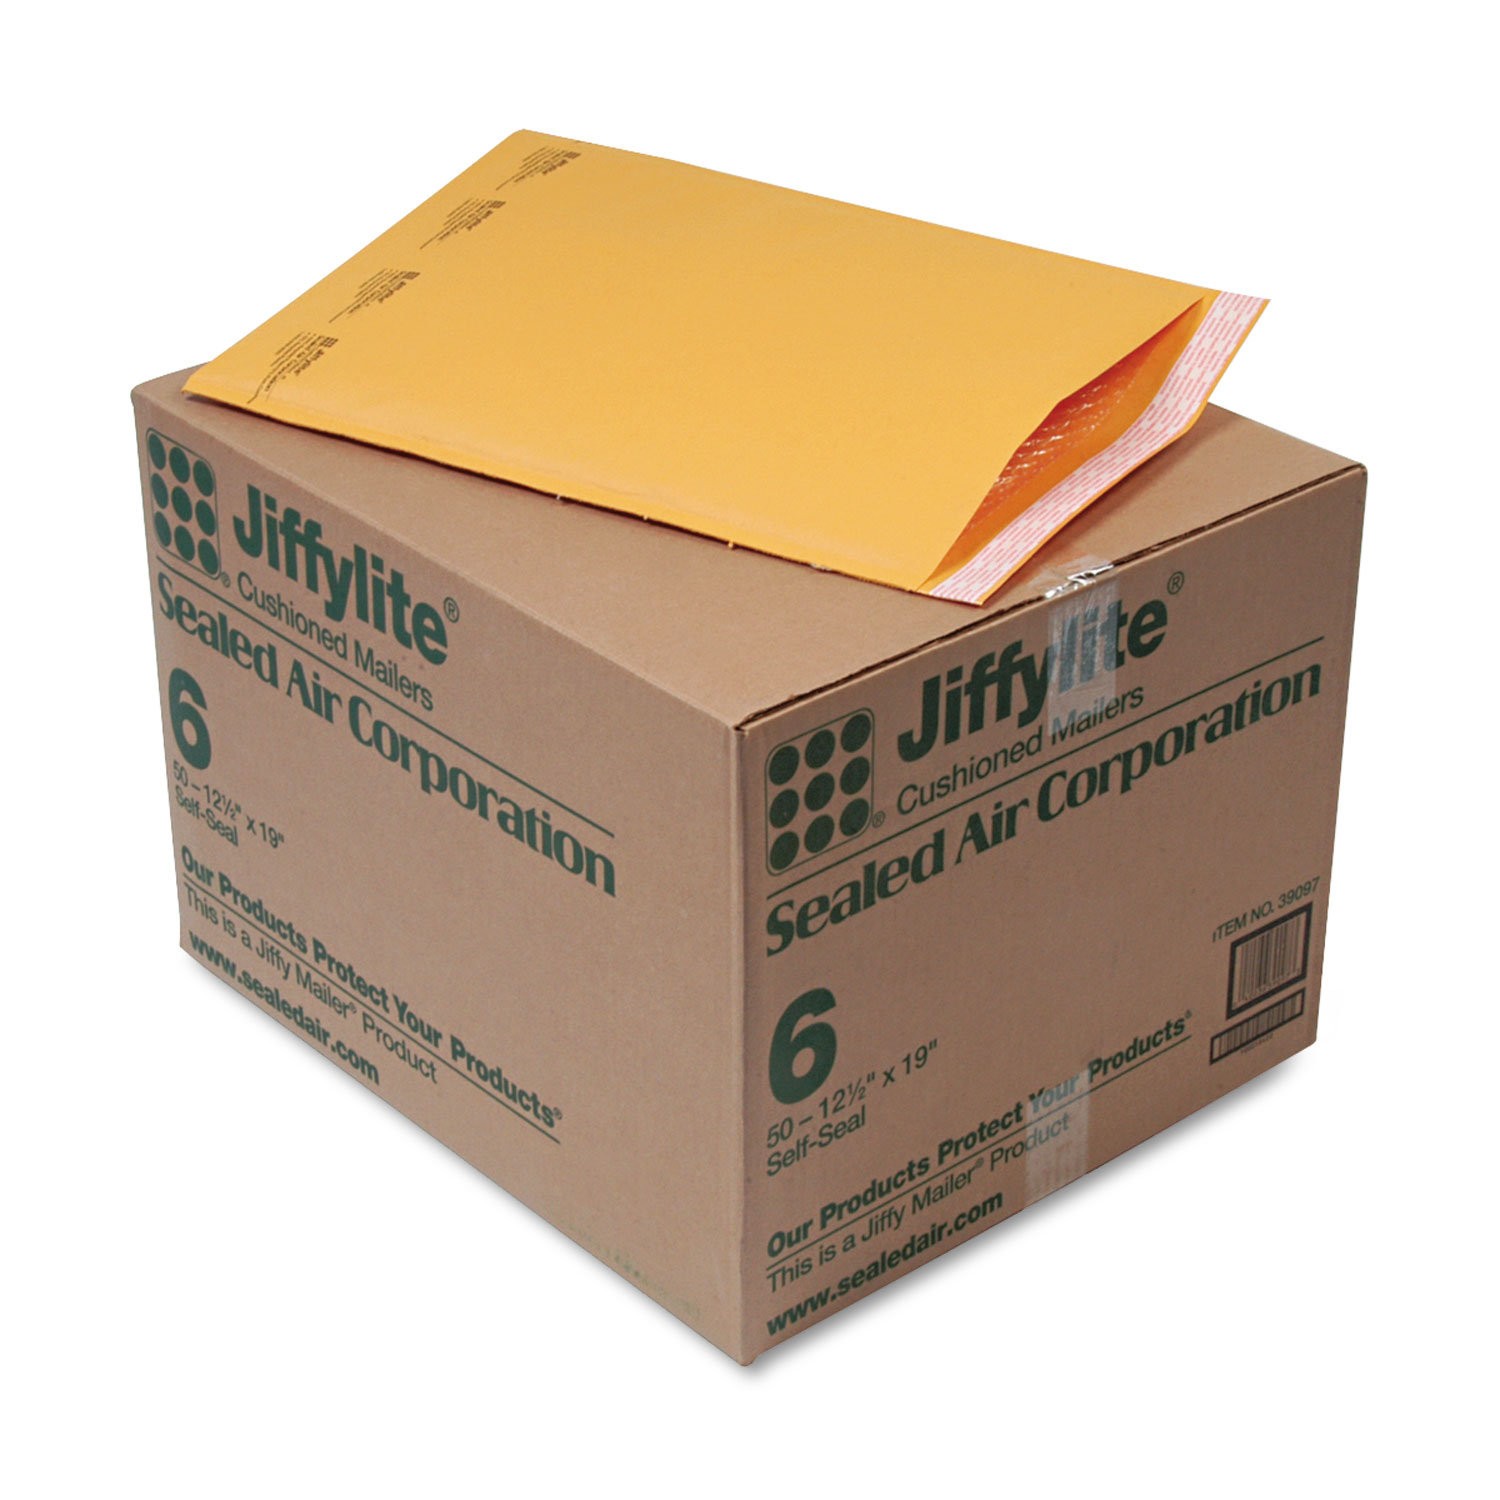  Sealed Air 39097 Jiffylite Self-Seal Bubble Mailer, #6, Barrier Bubble Lining, Self-Adhesive Closure, 12.5 x 19, Golden Brown Kraft, 50/Carton (SEL39097) 